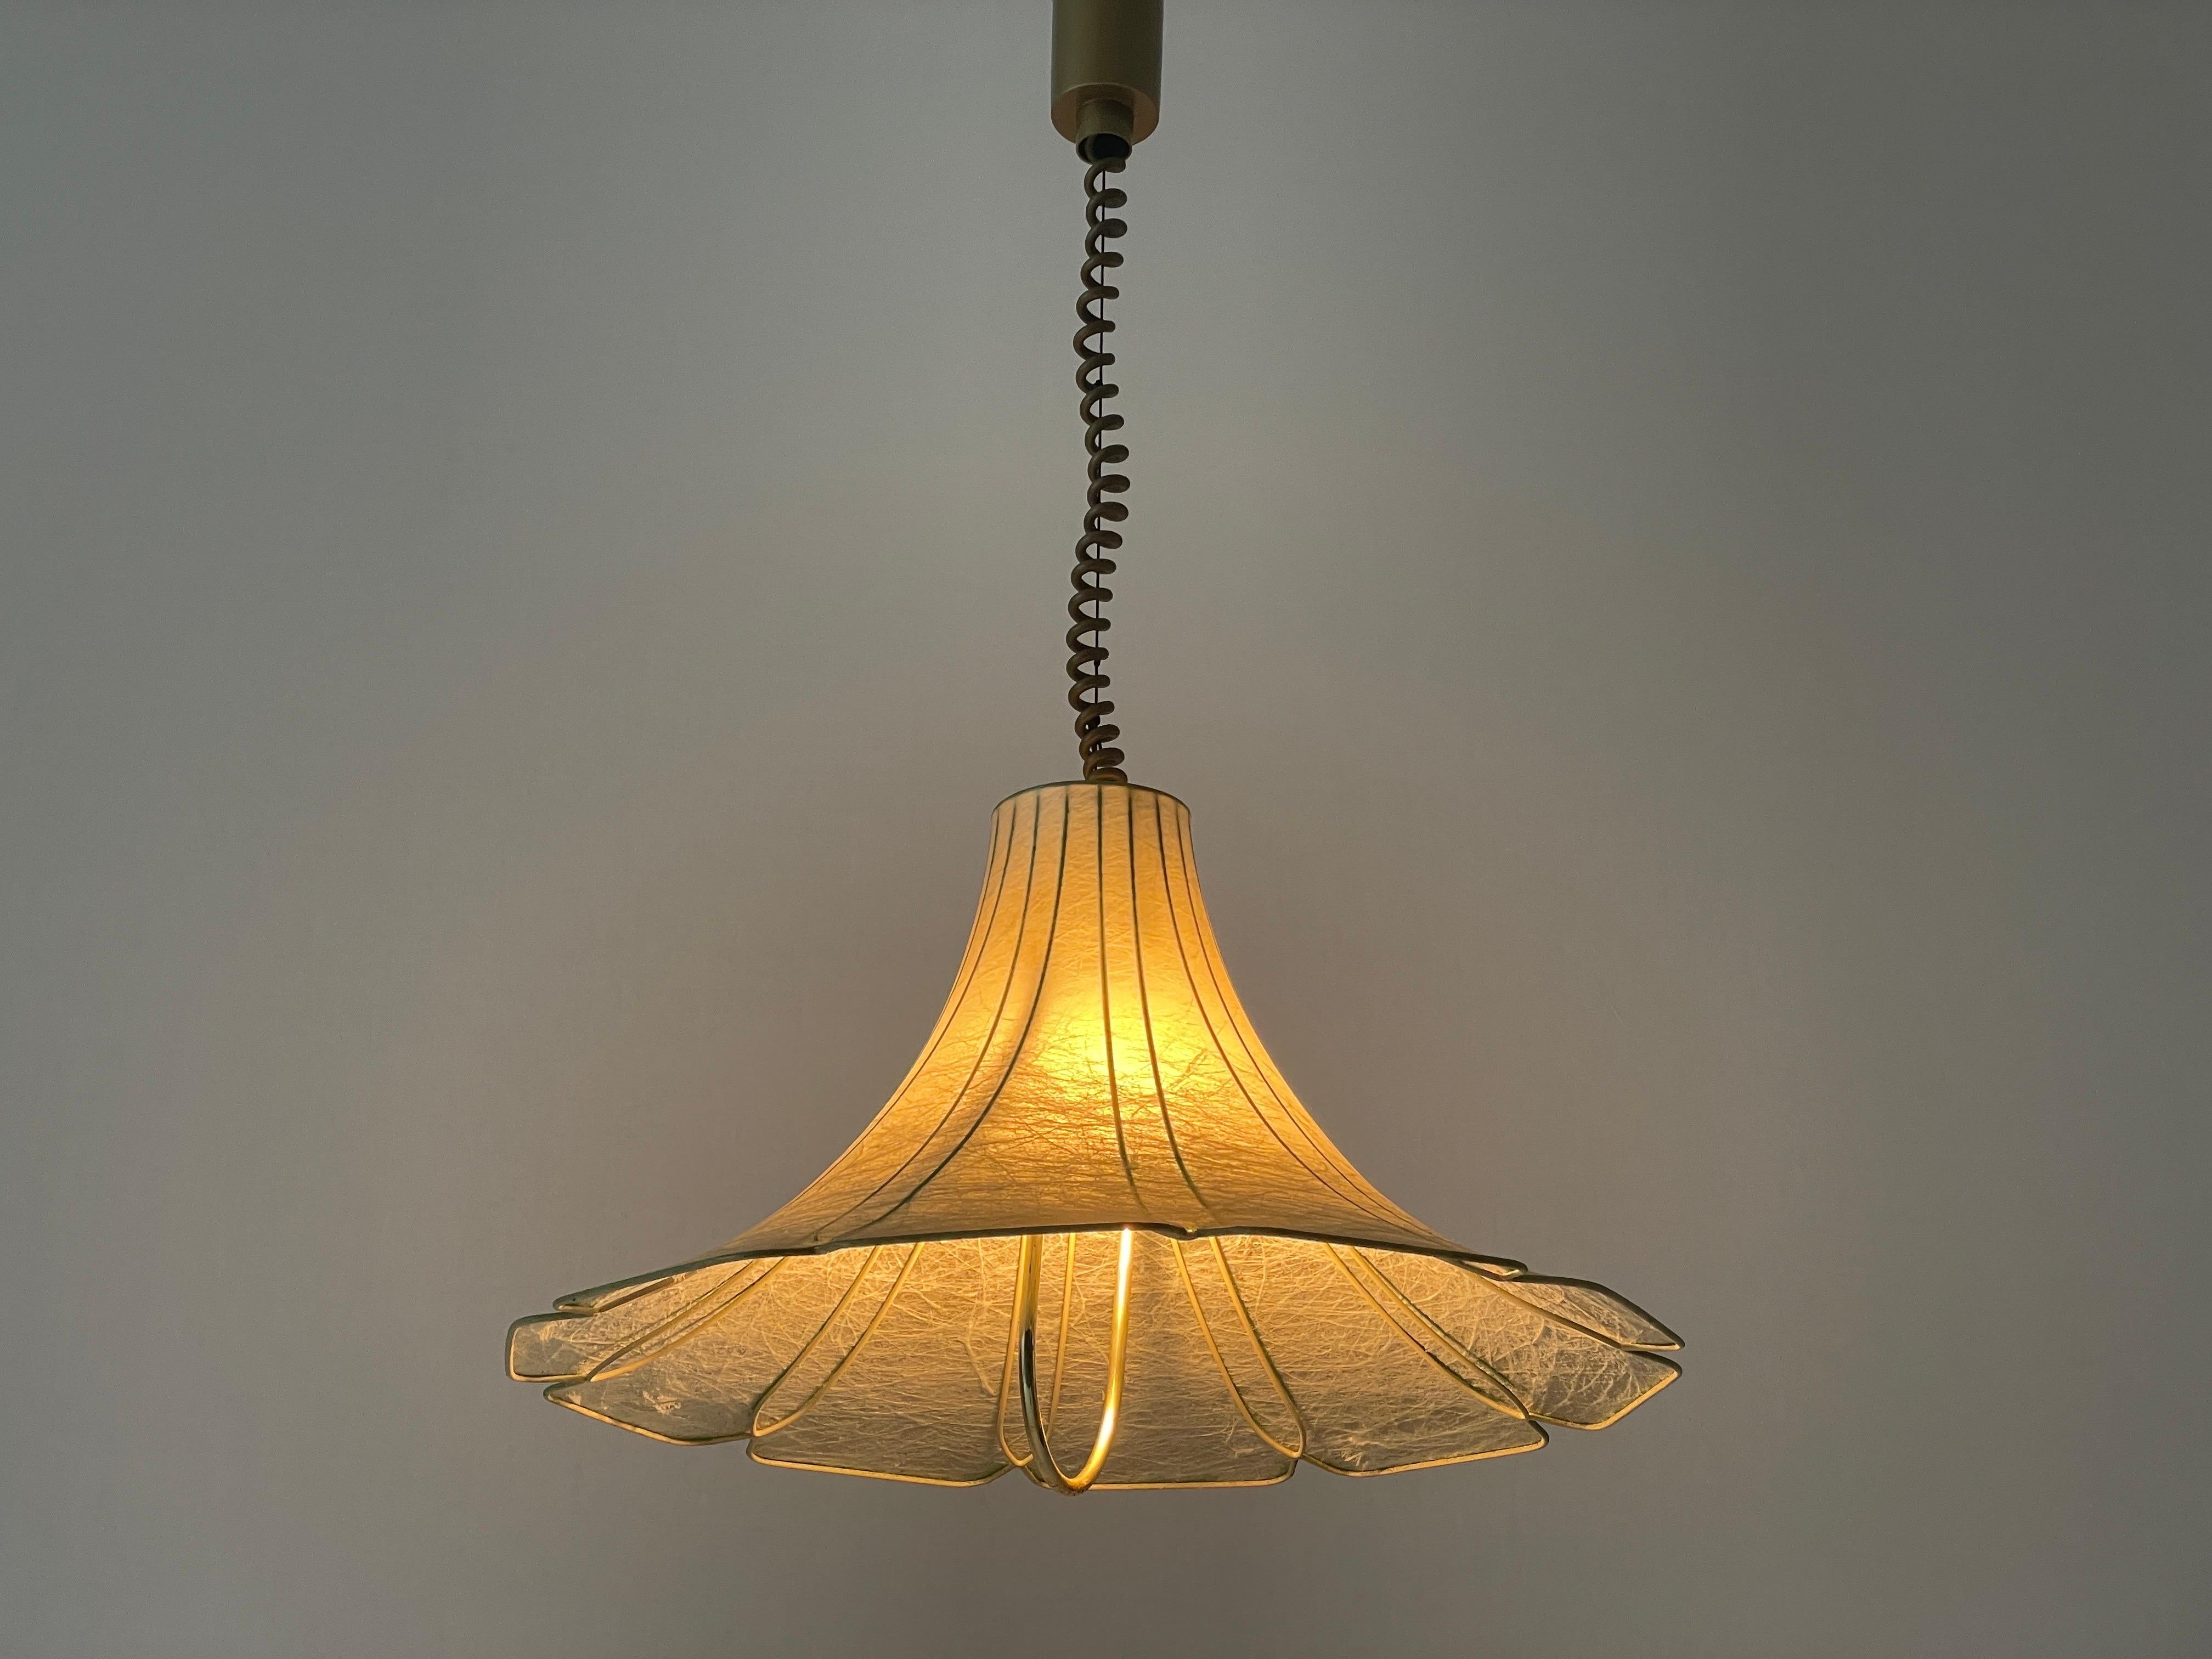 Tulip Design Cocoon Adjustable Height Pendant Lamp by Goldkant, 1960s, Germany For Sale 7